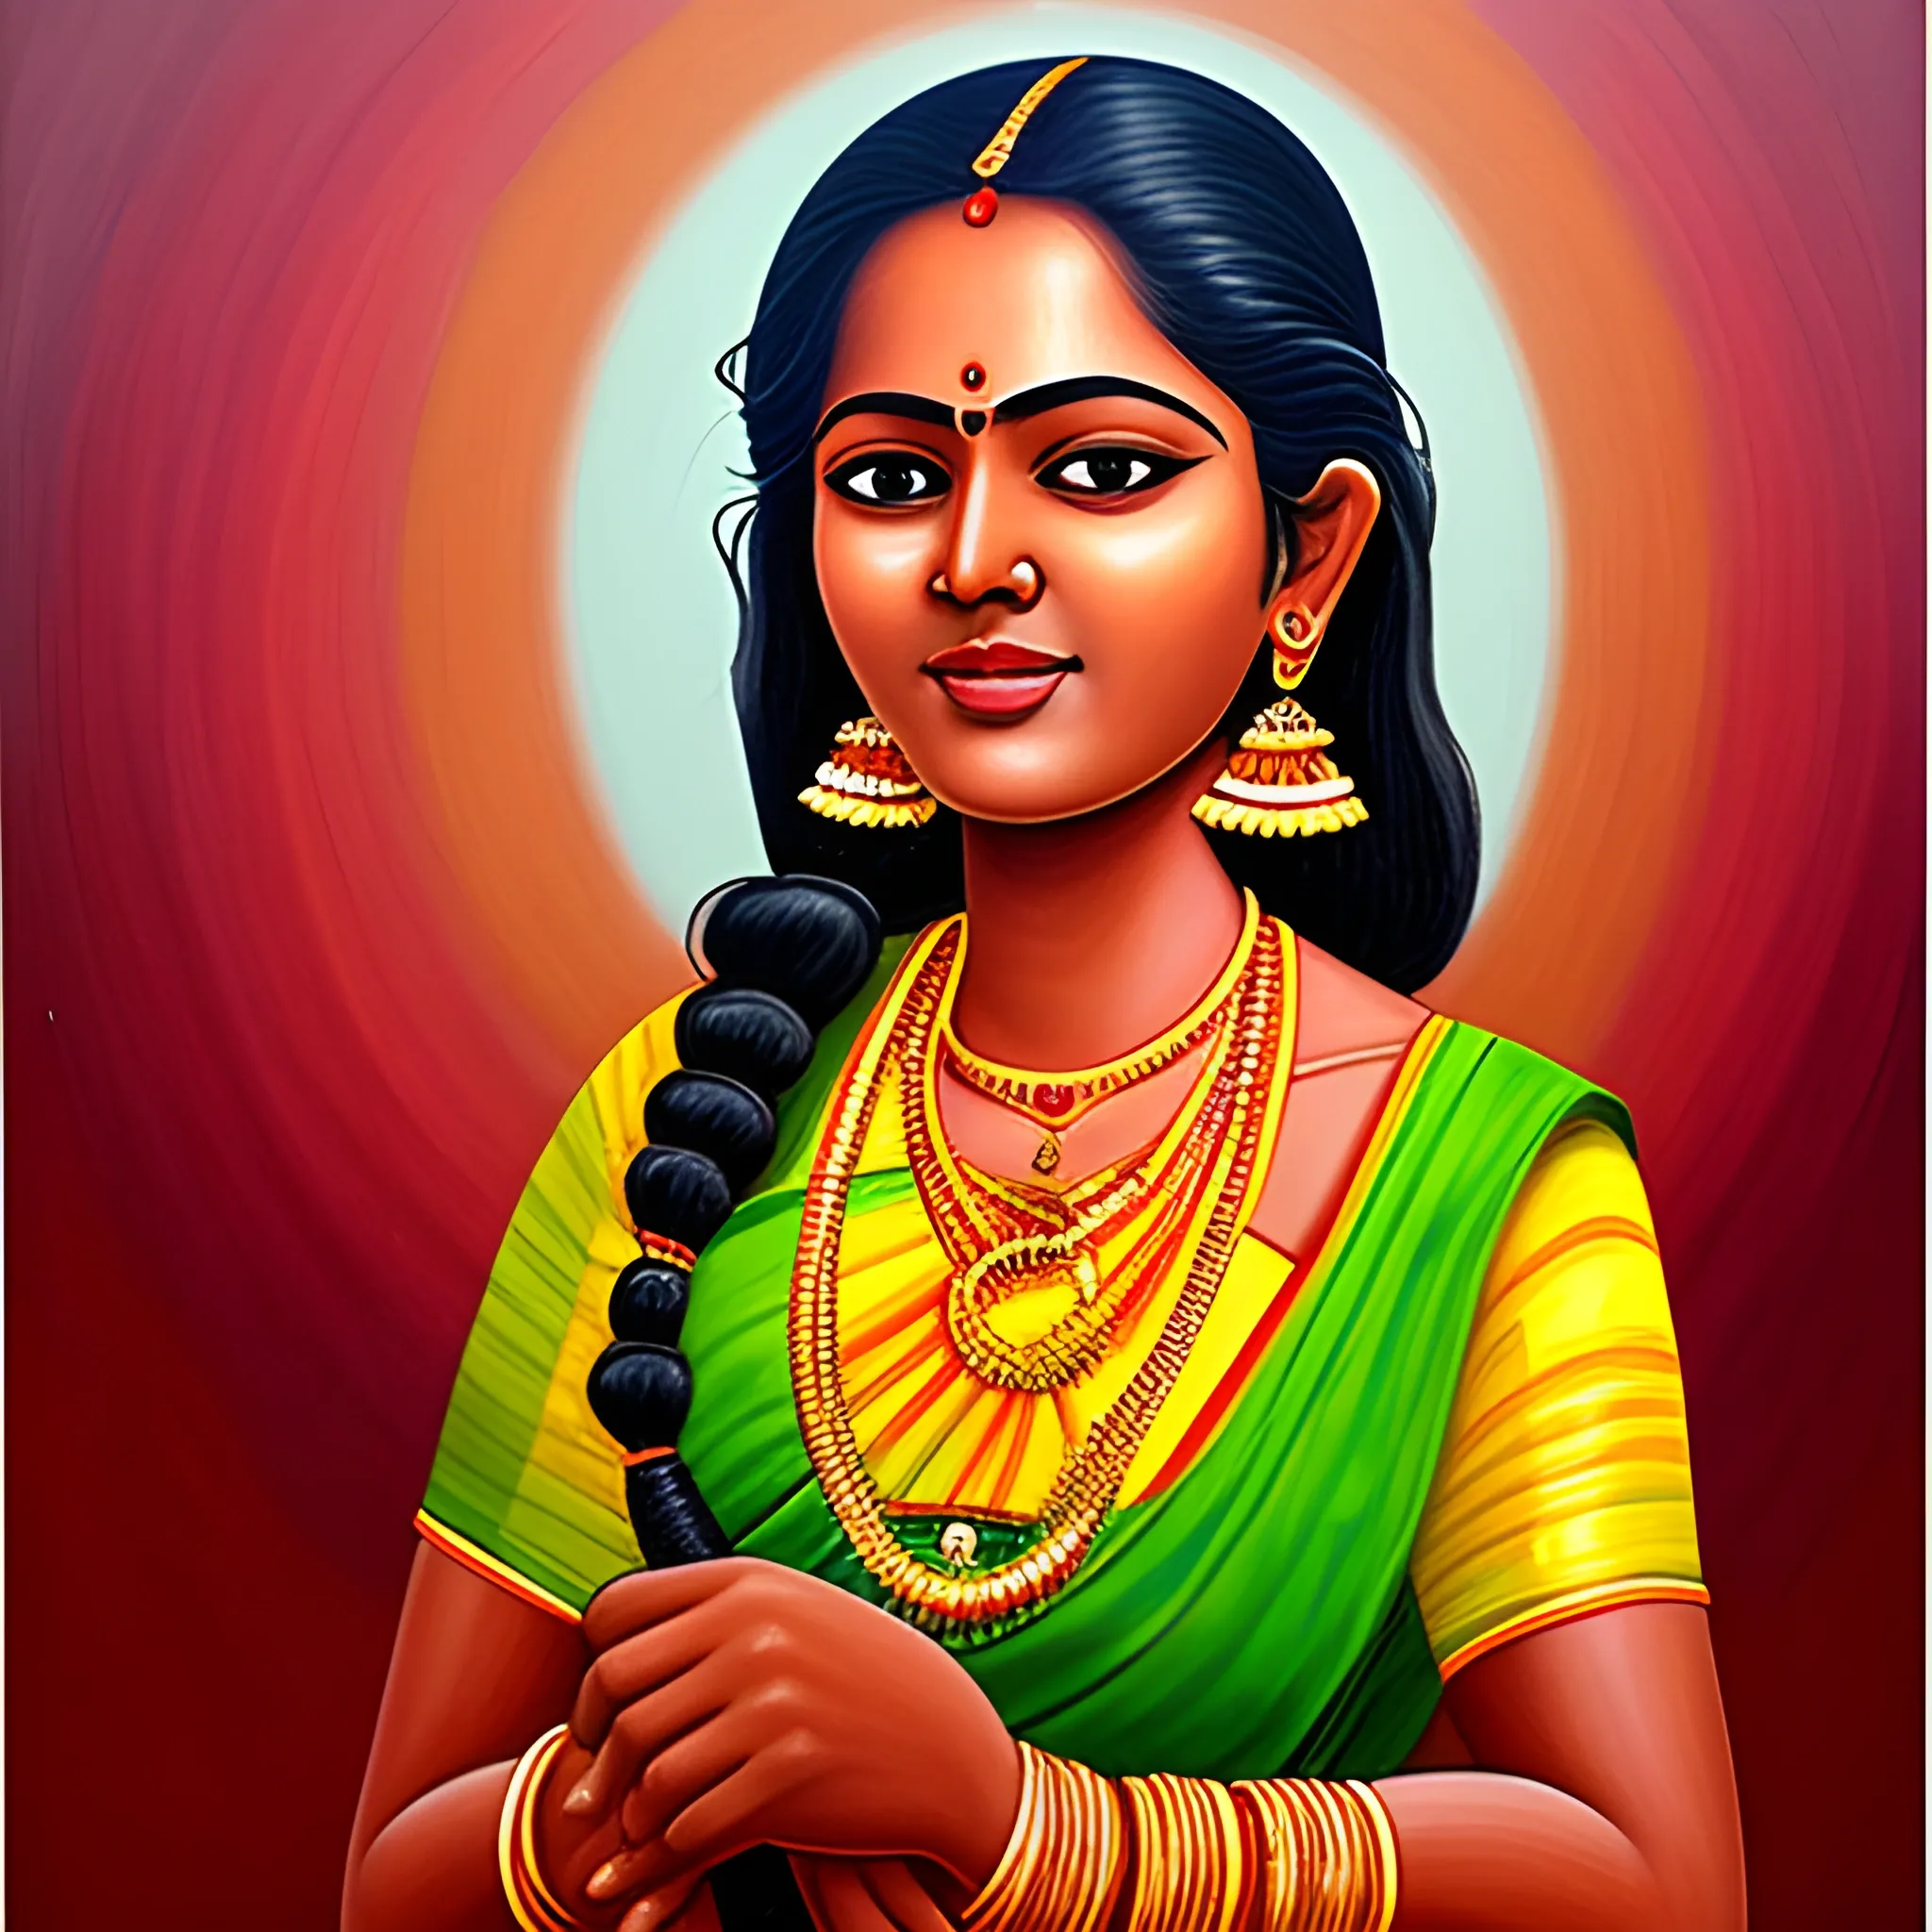 paintings of south Indian women
